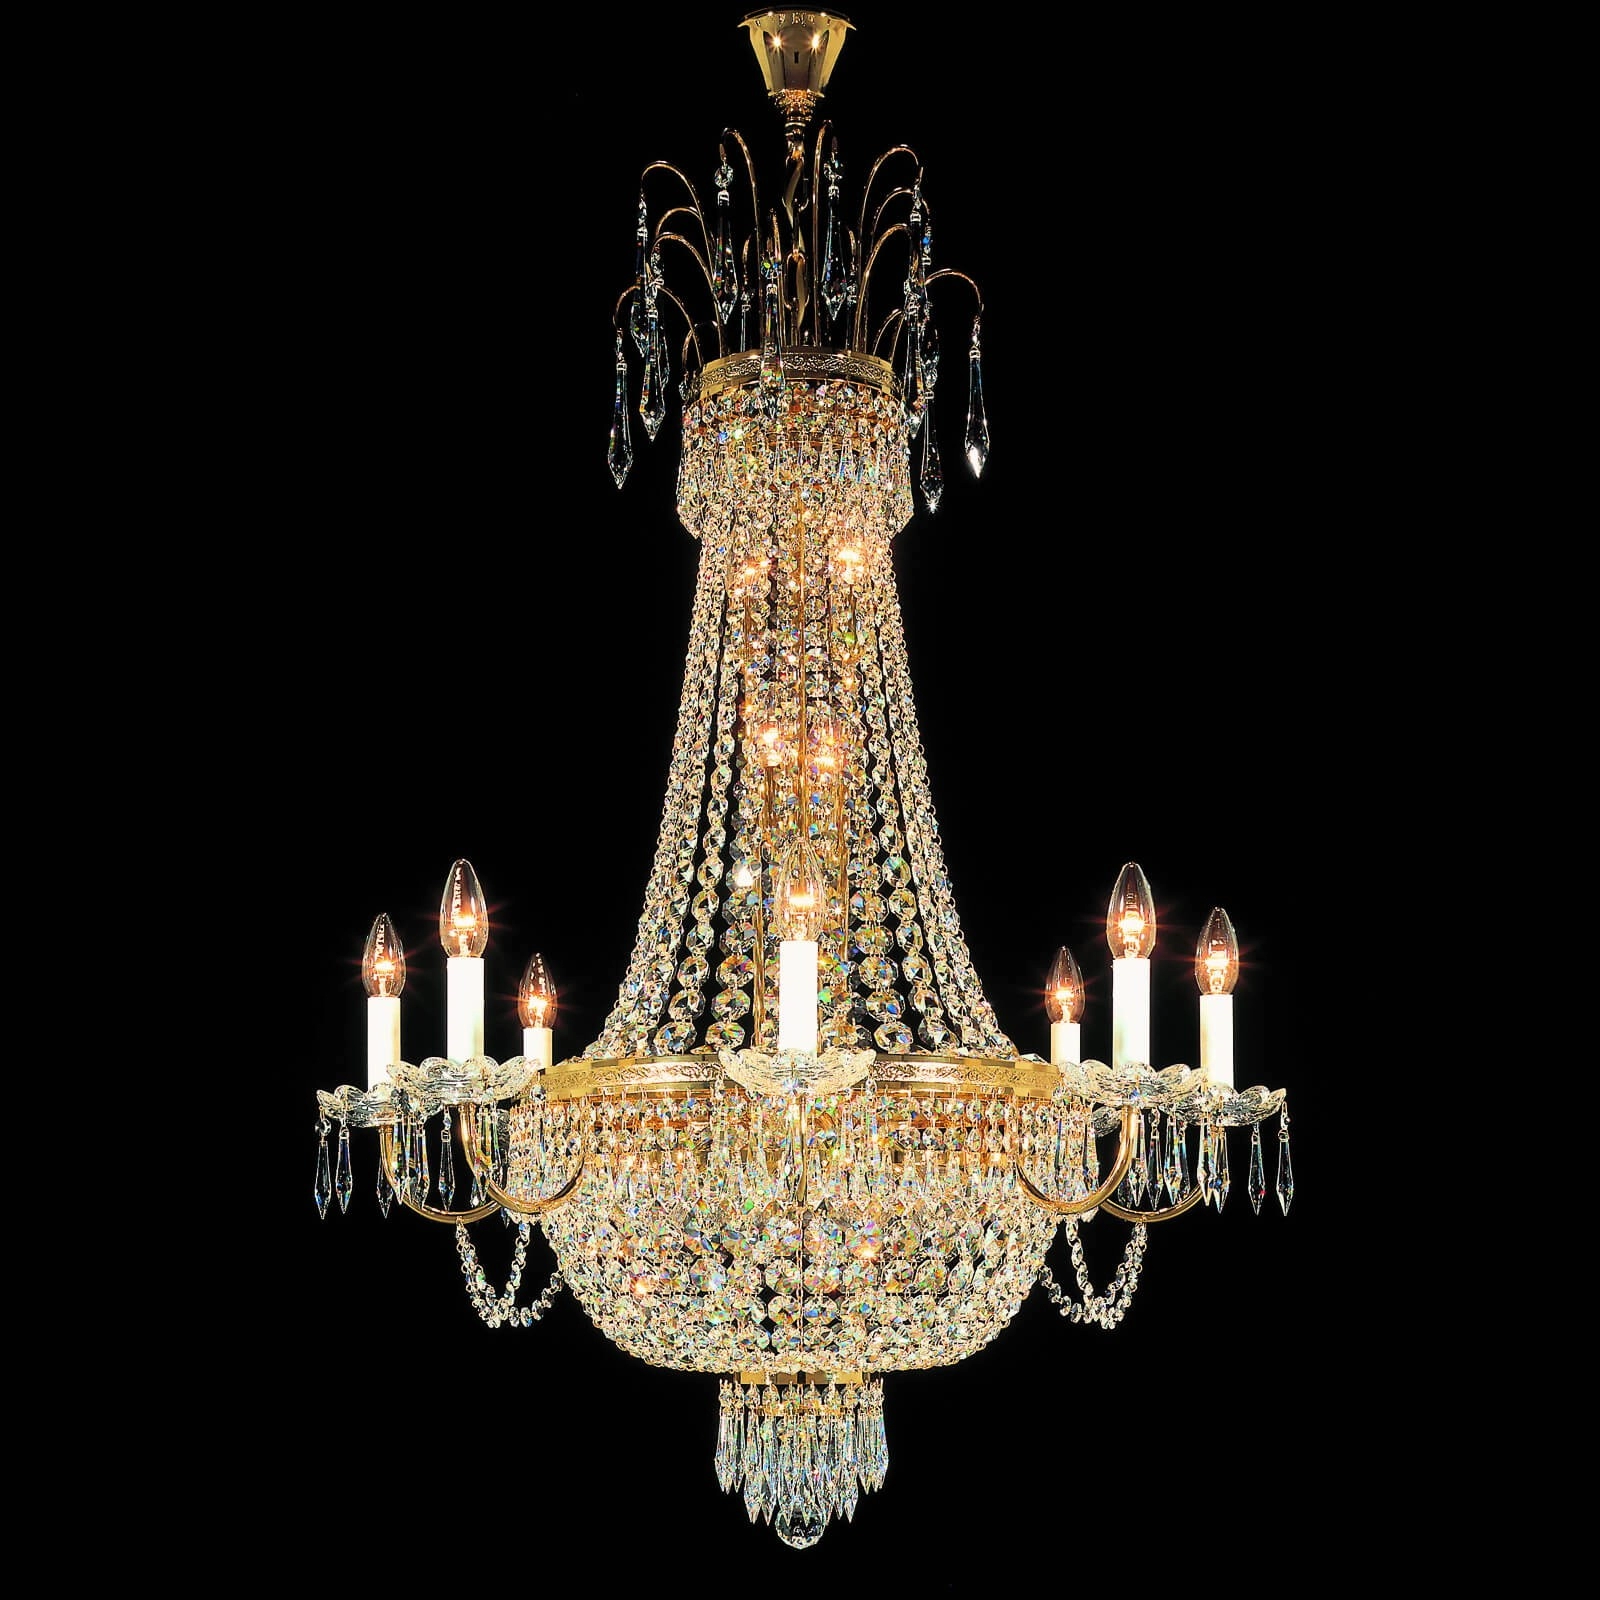 Small empire crystal chandeliers with long candles